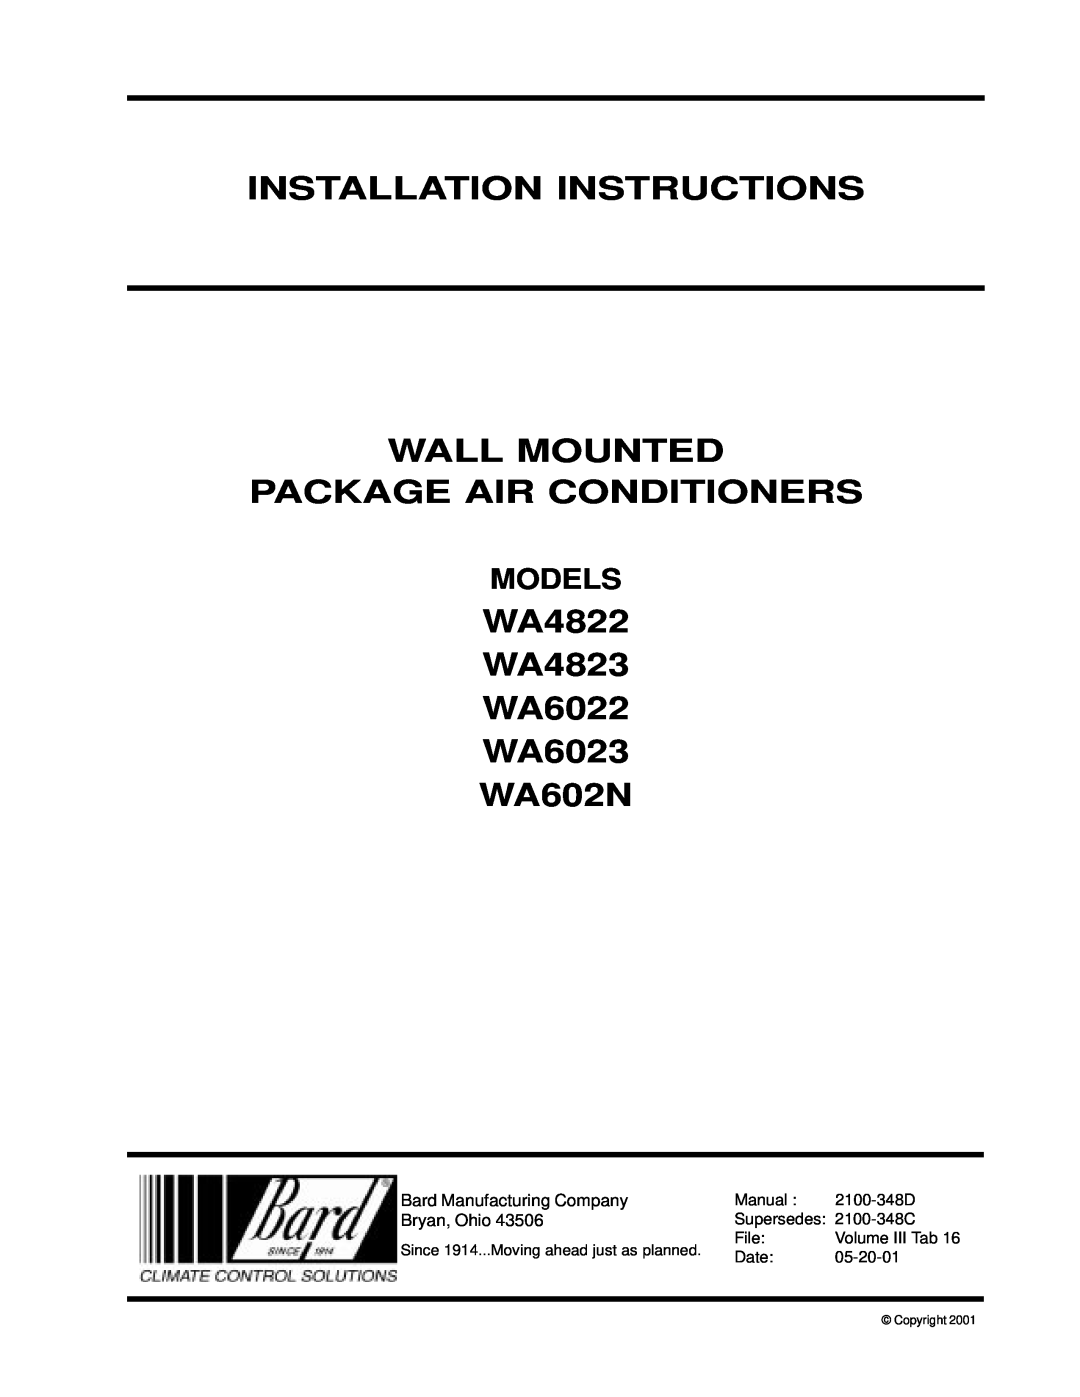 Bard WA602N, WA6023 installation instructions Installation Instructions Wall Mounted, Package Air Conditioners, Models 